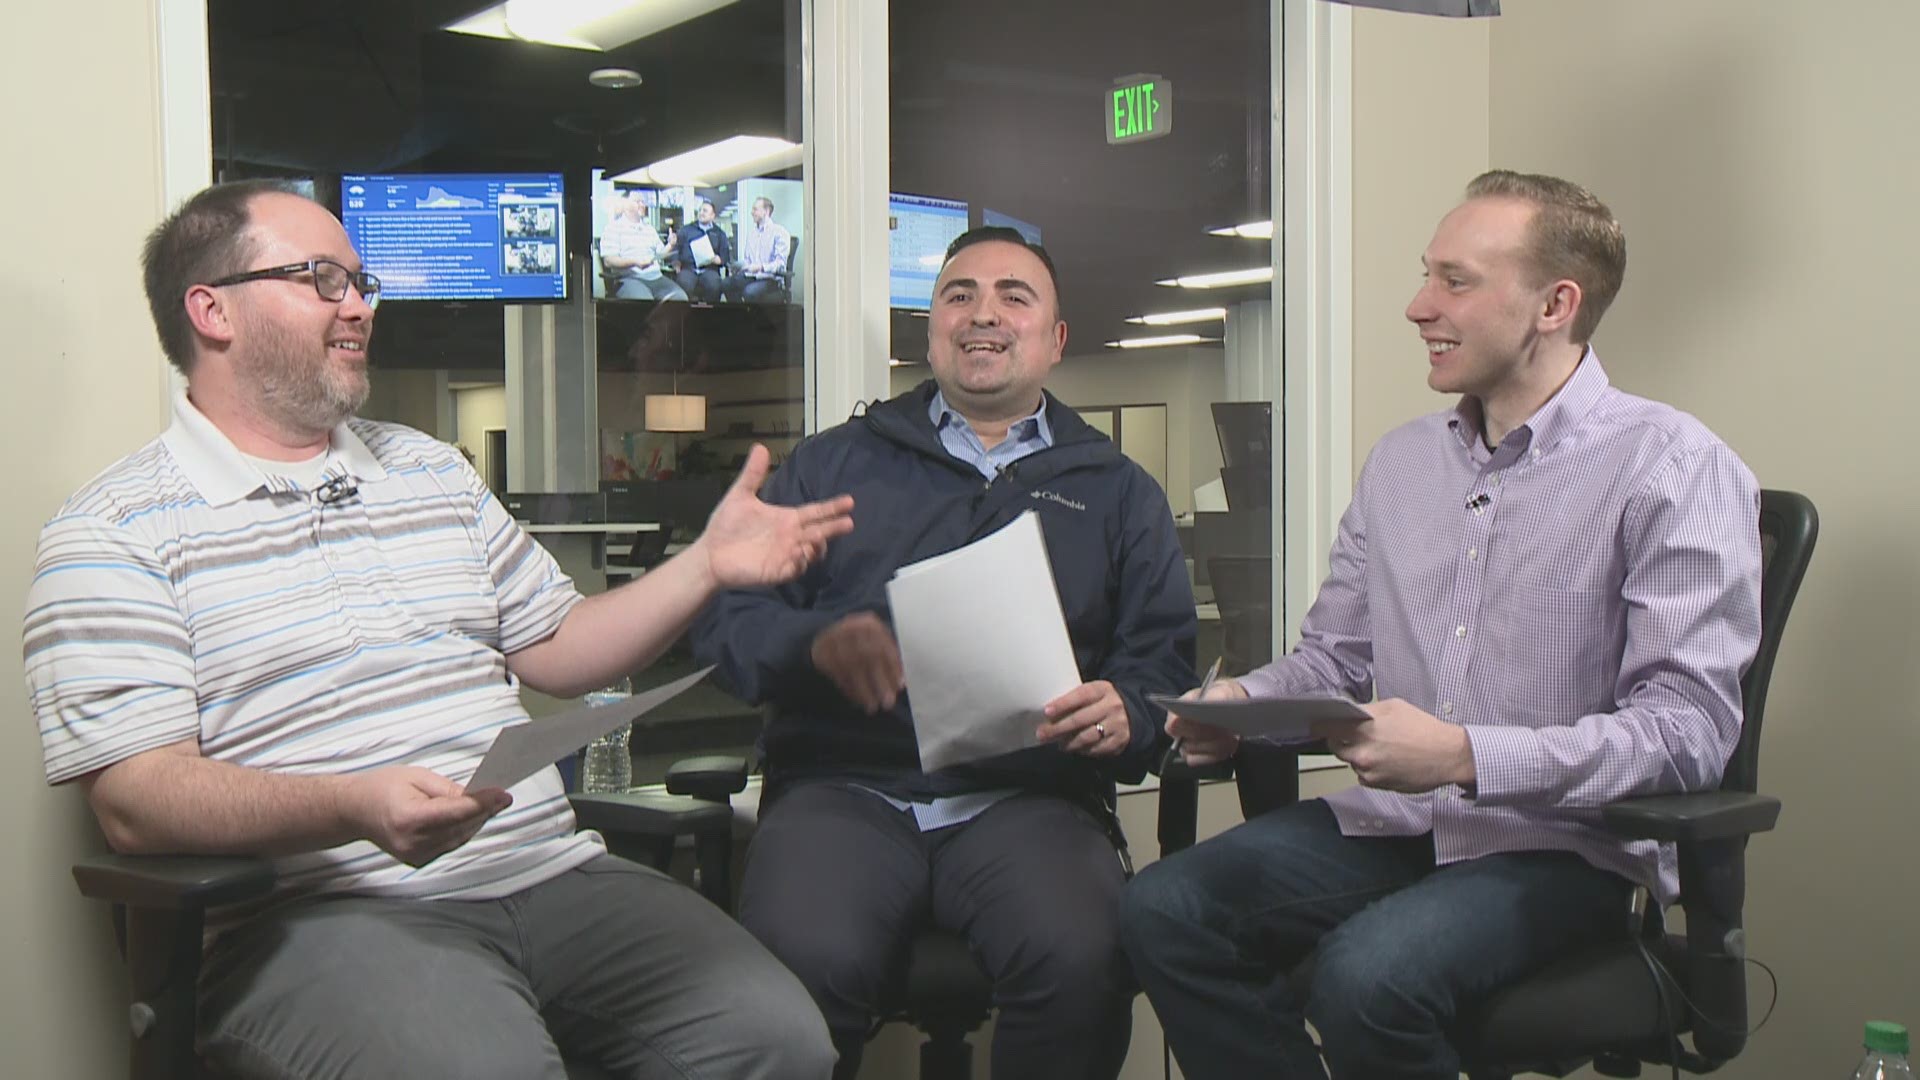 KGW's Jared Cowley, Orlando Sanchez and Nate Hanson talk about the Blazers' impressive play of late (13-5 in the past 18 games) and why they think the team is playing so well.